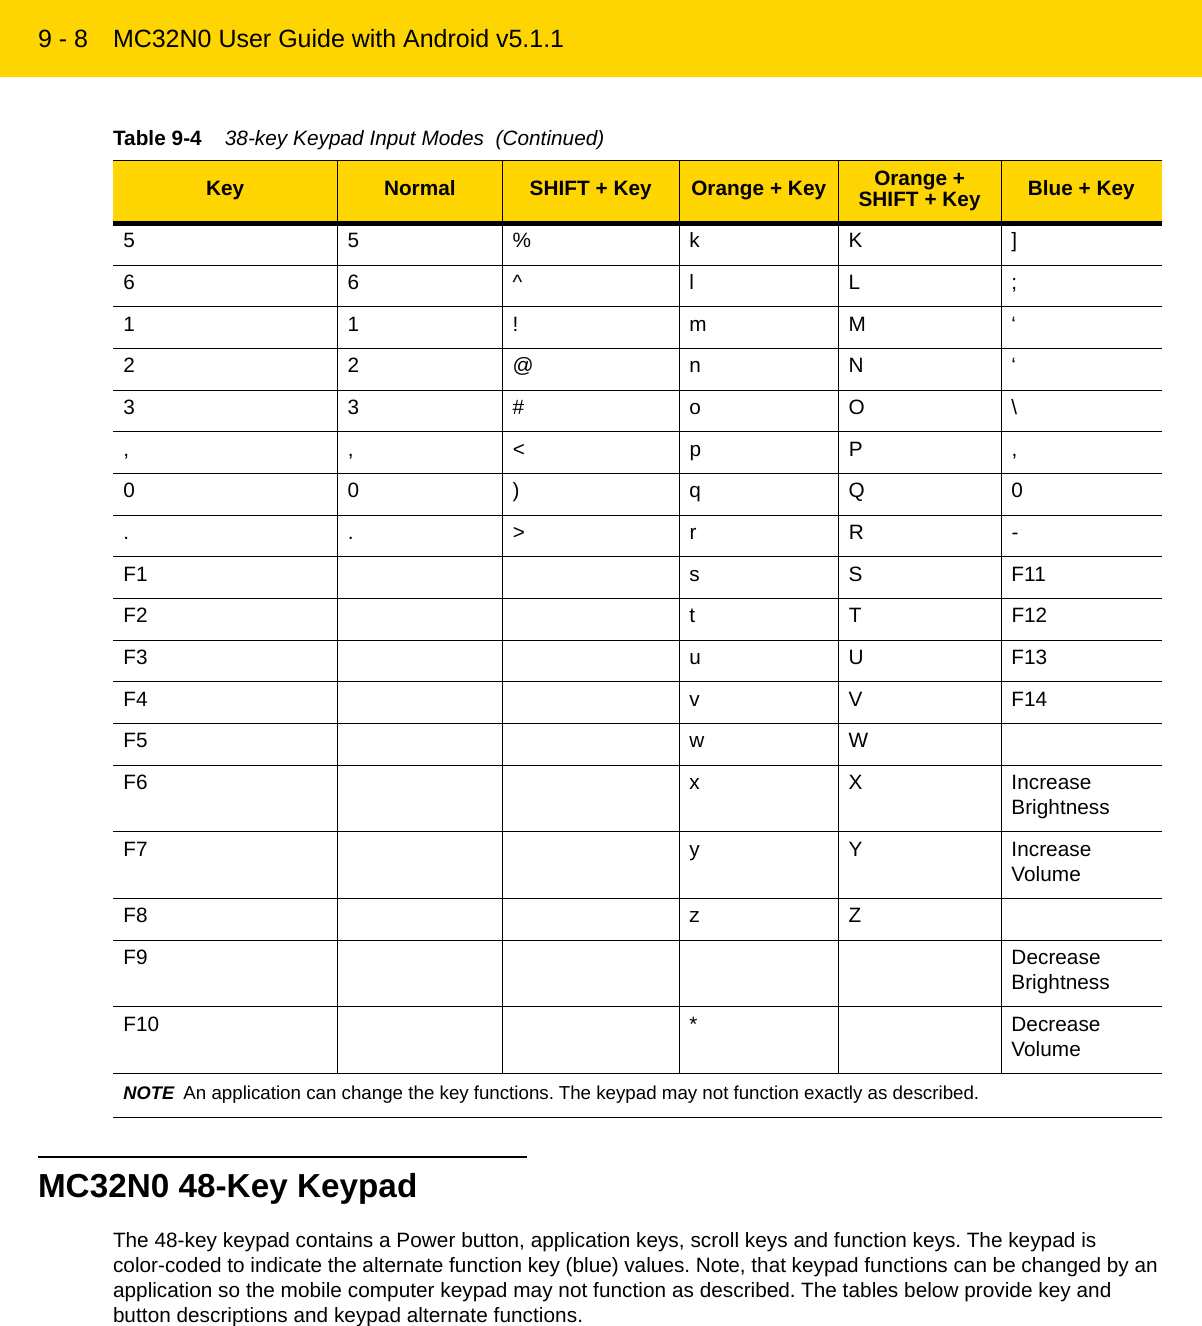 9 - 8 MC32N0 User Guide with Android v5.1.1MC32N0 48-Key KeypadThe 48-key keypad contains a Power button, application keys, scroll keys and function keys. The keypad is color-coded to indicate the alternate function key (blue) values. Note, that keypad functions can be changed by an application so the mobile computer keypad may not function as described. The tables below provide key and button descriptions and keypad alternate functions.55%kK]66^lL;11!mM‘22@nN‘33#oO\,,&lt;pP,00)qQ0..&gt;rR-F1 s S F11F2 t T F12F3 u U F13F4 v V F14F5 w WF6 x X Increase BrightnessF7 y Y Increase VolumeF8 z ZF9 Decrease BrightnessF10 * Decrease VolumeNOTE An application can change the key functions. The keypad may not function exactly as described.Table 9-4    38-key Keypad Input Modes  (Continued)Key Normal SHIFT + Key Orange + Key Orange + SHIFT + Key Blue + KeyREVIEW ONLY - REVIEW ONLY - REVIEW ONLY                             REVIEW ONLY - REVIEW ONLY - REVIEW ONLY